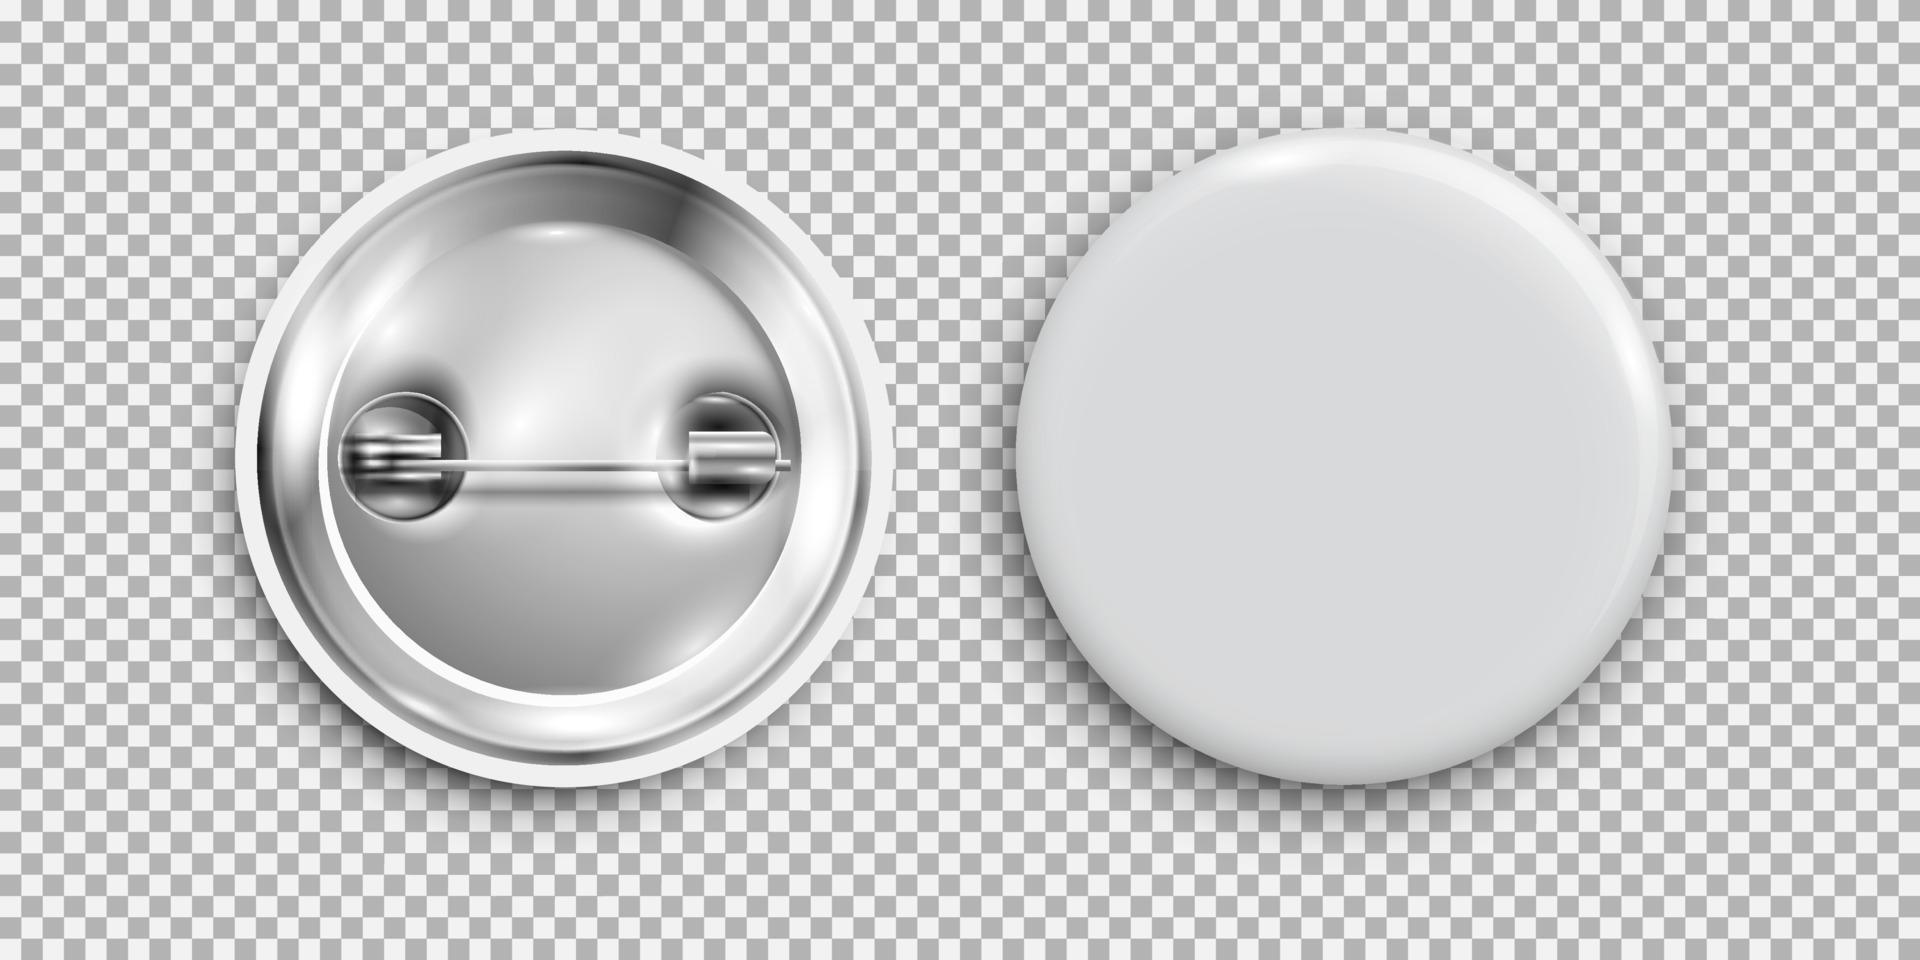 Blank badge, 3d white round button, pin button isolated vector